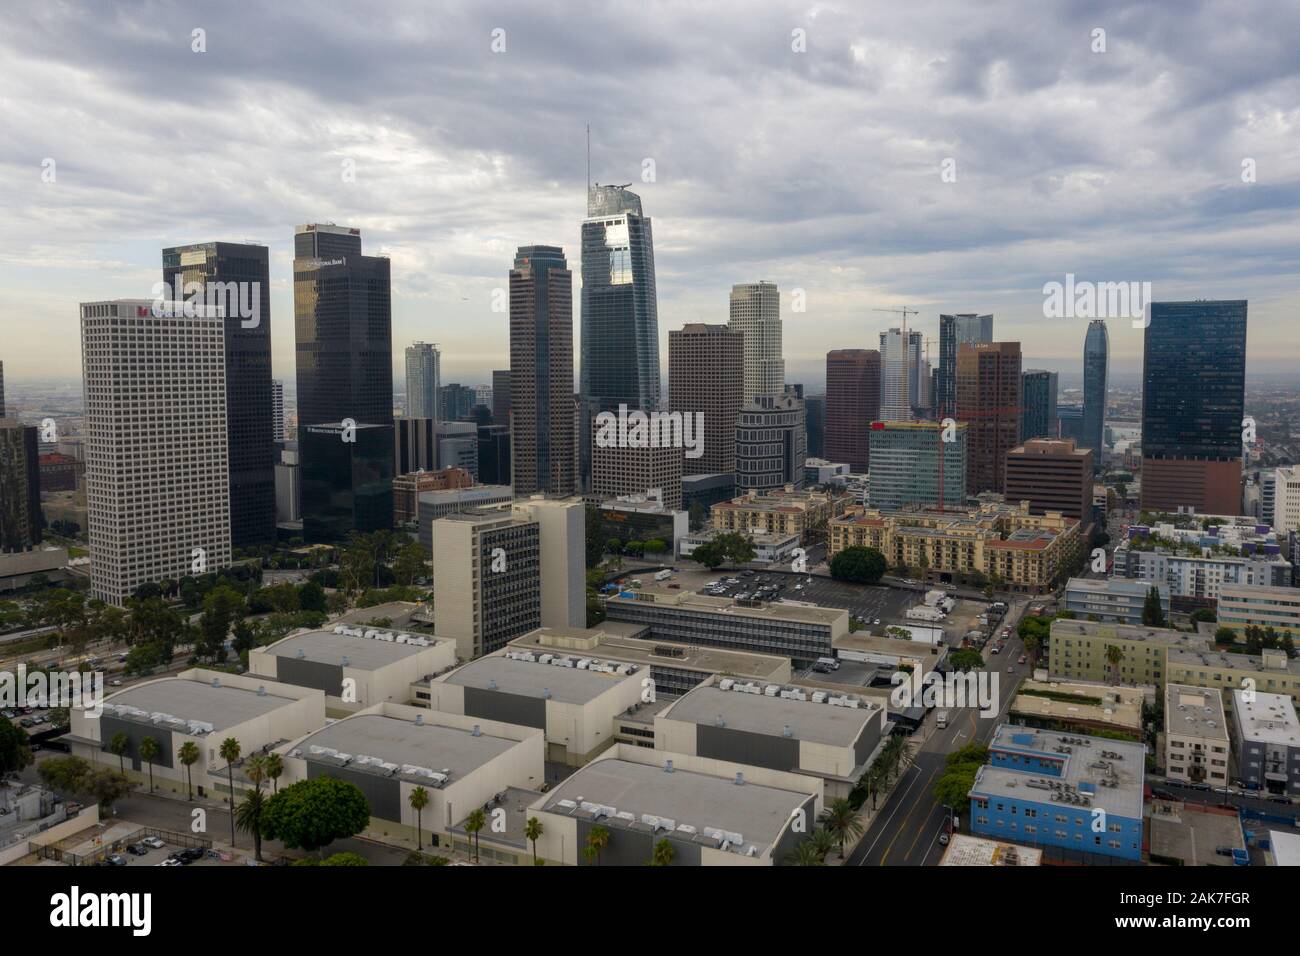 Cloudy day over Los Angeles Stock Photo